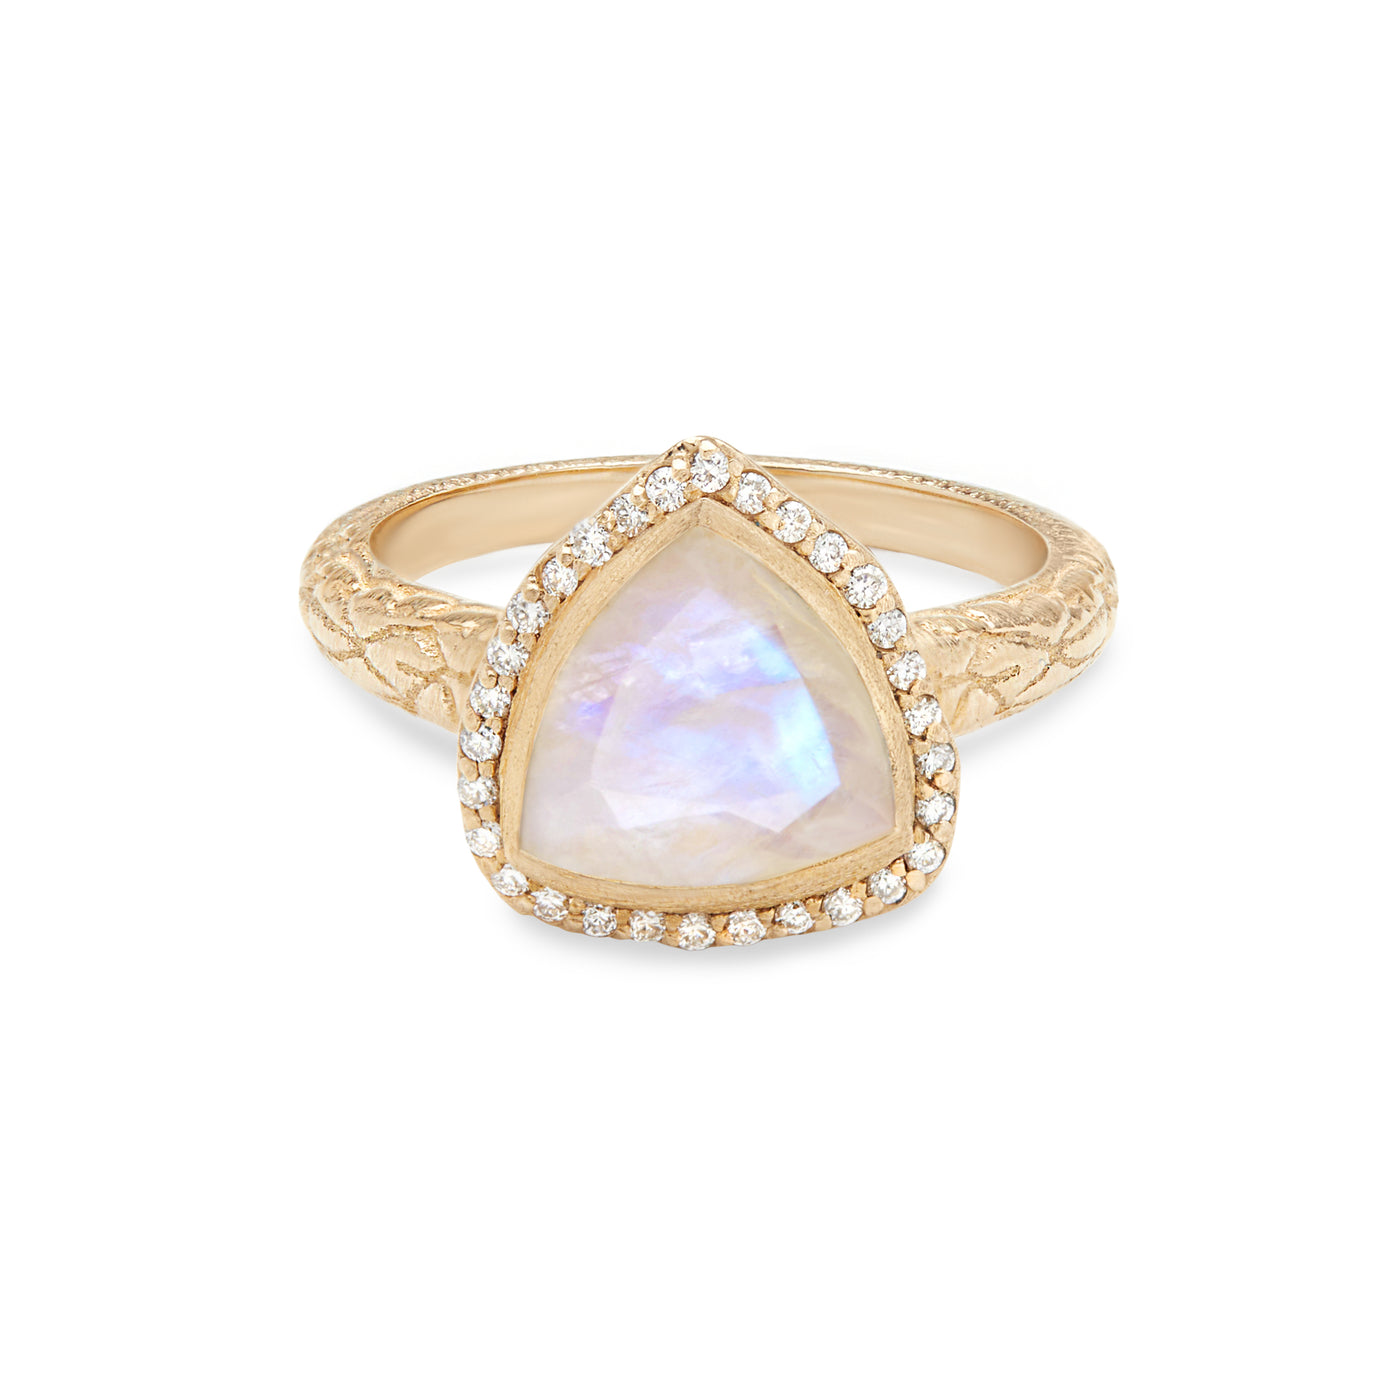 14 Karat Yellow Gold Ring with Triangle Shaped Moonstone with Halo of White Diamonds Against White Background